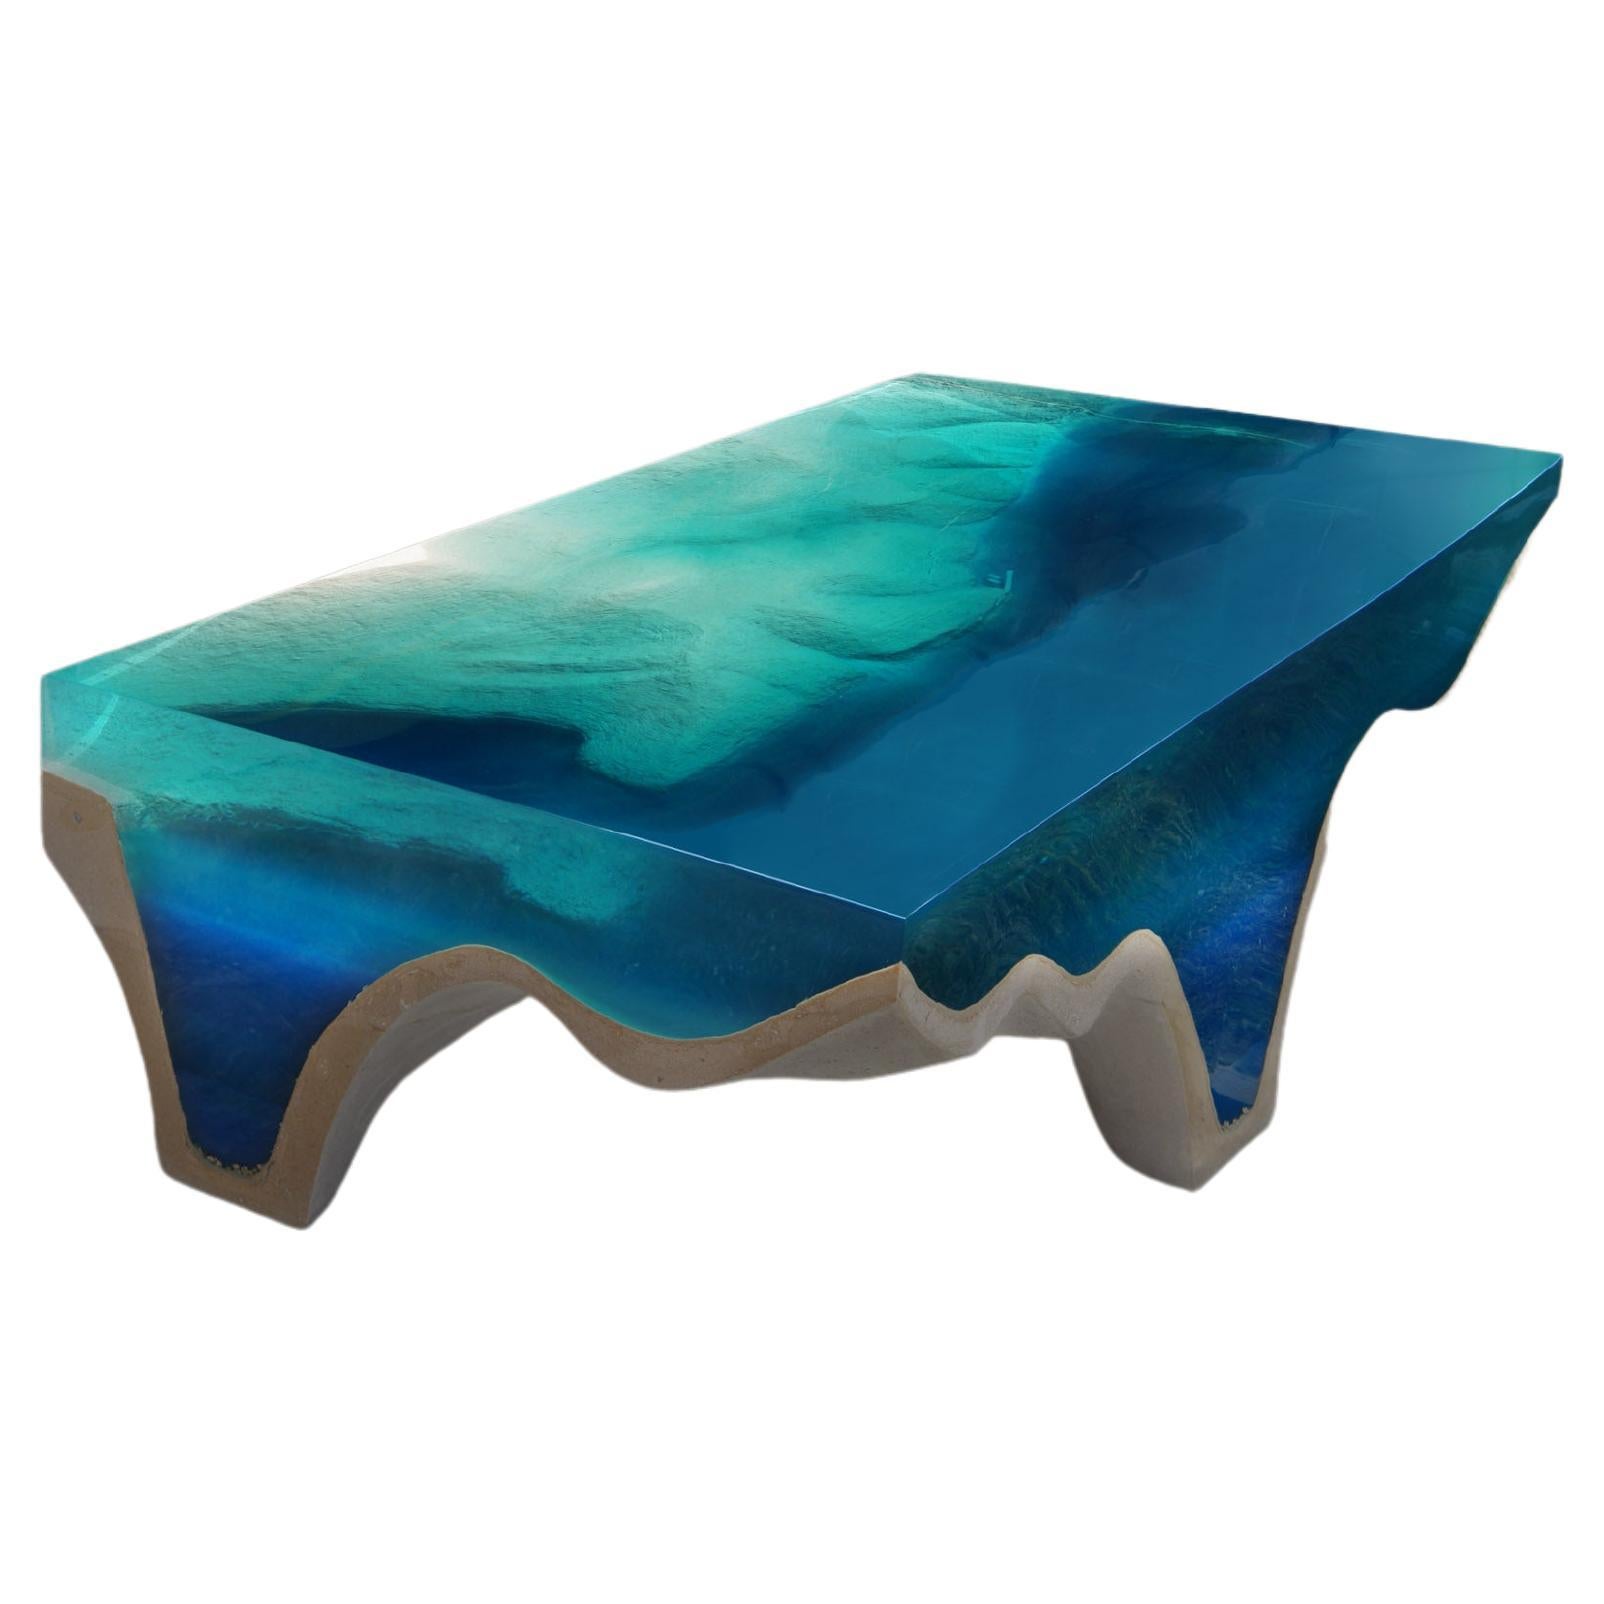 The Story
The eternal Greek story of sea and land braking into each other to the infinite, captured into one memorable piece – Crete Table.
Monolithic, sculptural and functional artwork. A geometry with contrasting straight and fluid lines, that is